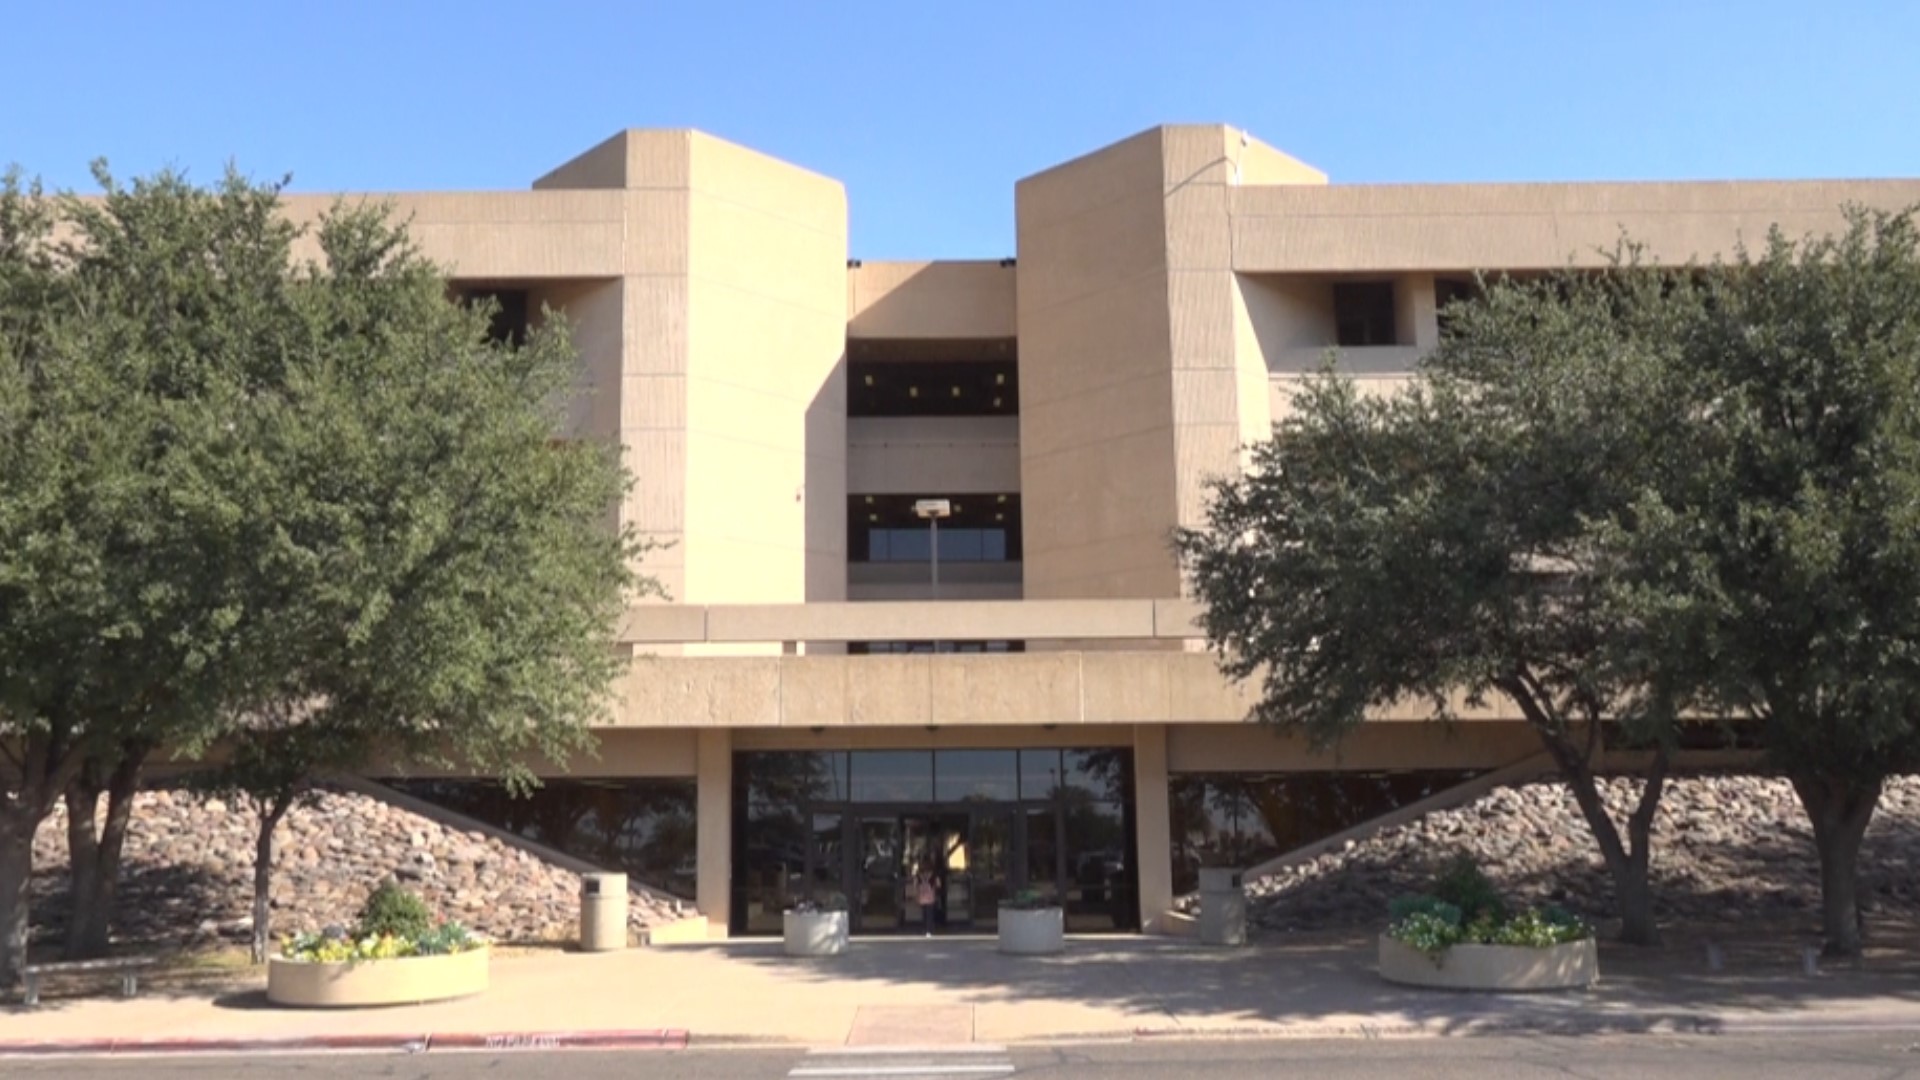 Universities across the state are waiting on Gov. Abbott to sign a bill that would allocate state funds for capital projects, with UTPB in that group.